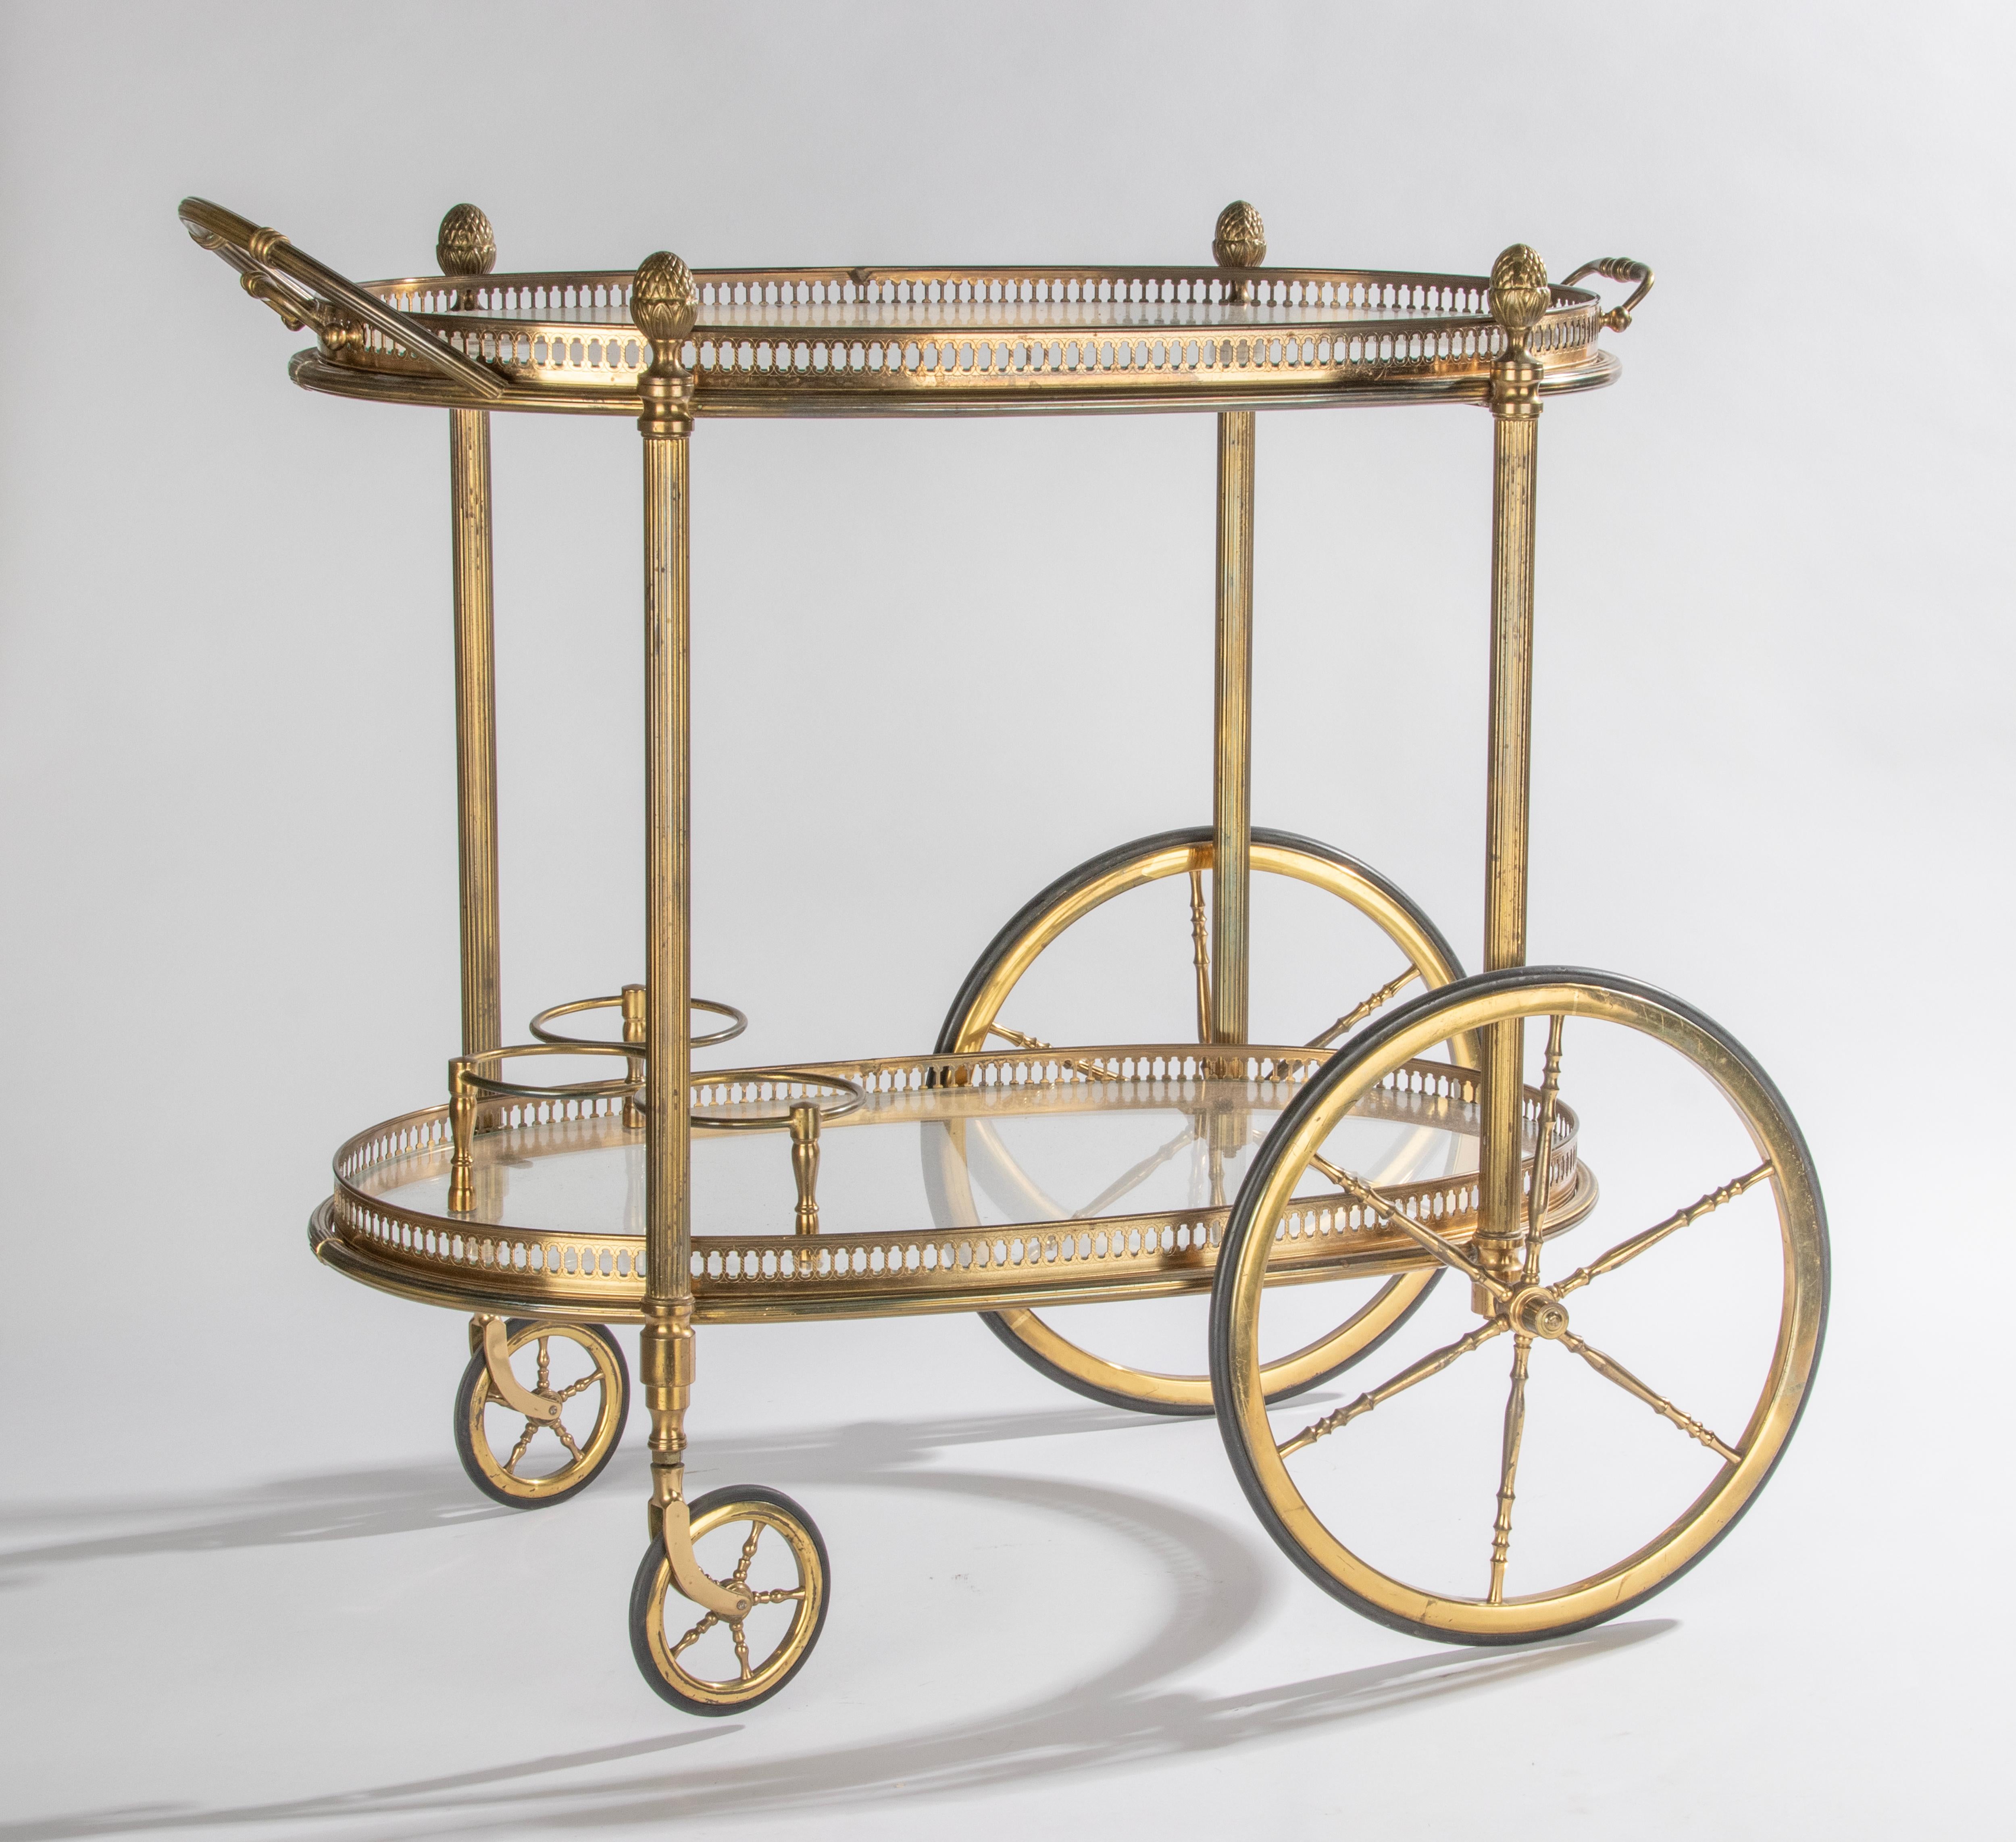 Elegant bar cart with two tiers with glass, attributed to Maison Baguès, Paris. The trolley is made of brass colored metal and glass, with beautiful refined details, such as the pierced brass galleries, handles and typical Bagués pine cones on each